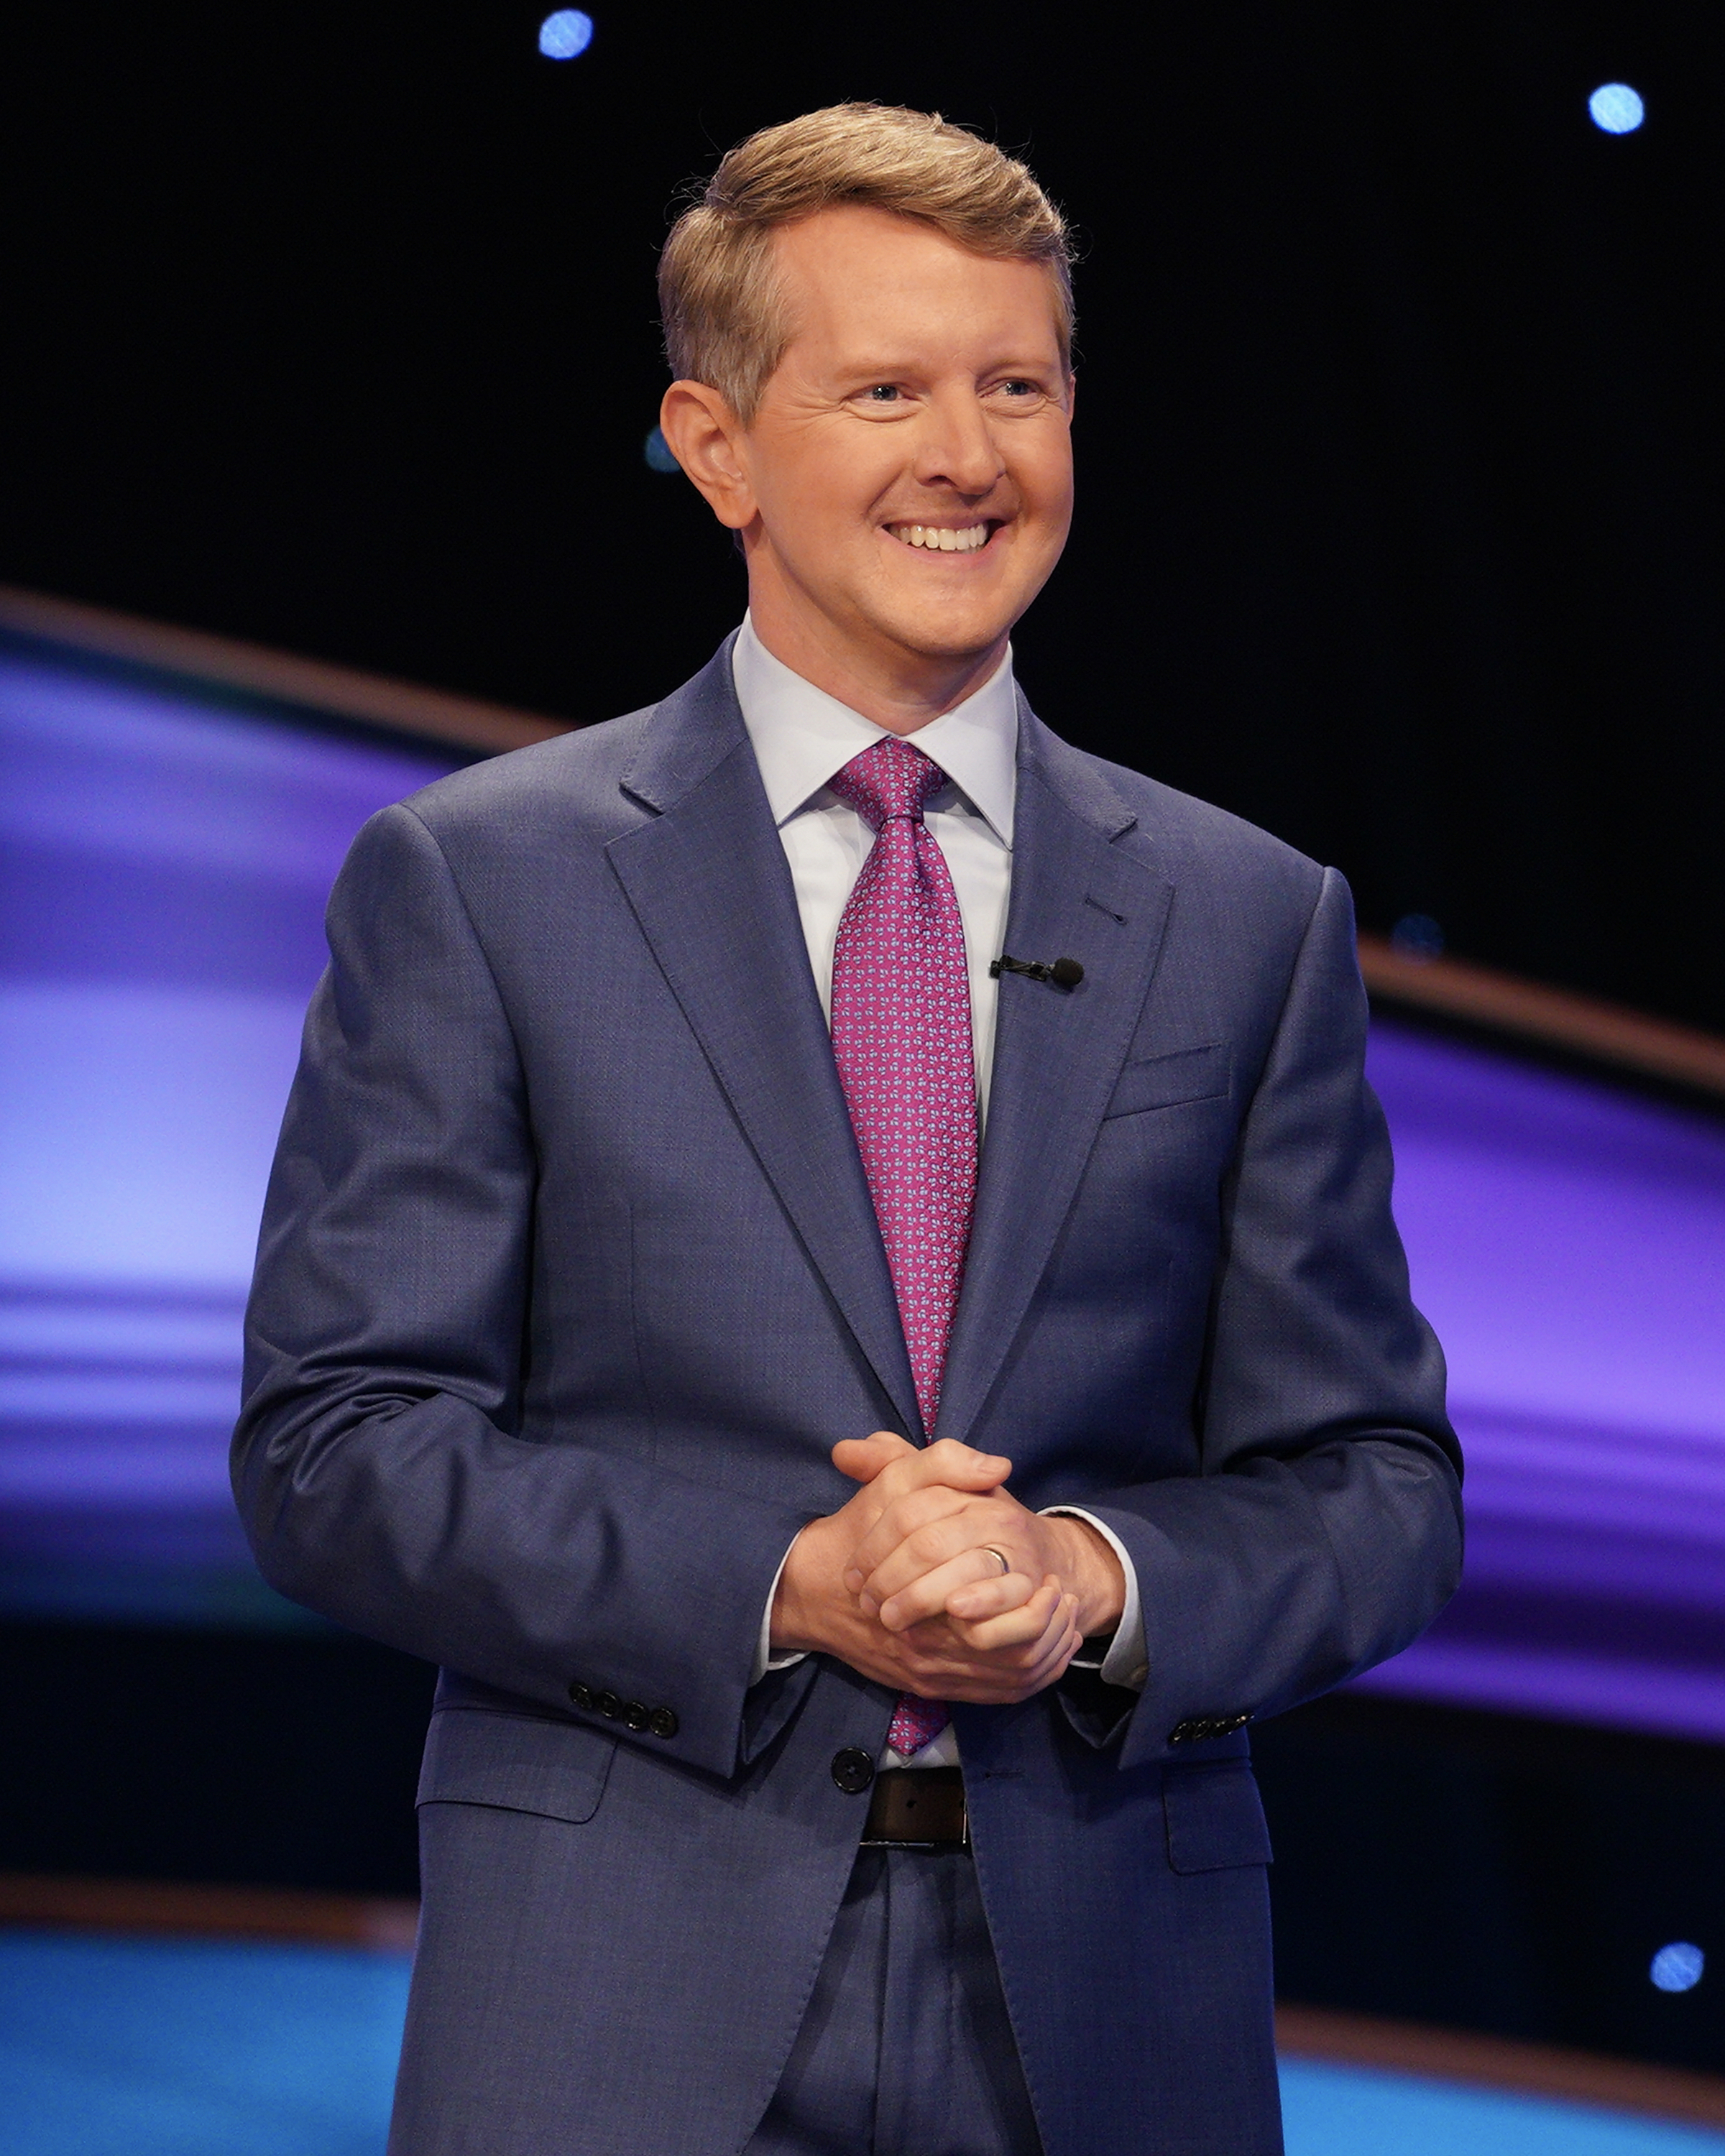 Ken Jennings currently hosts the prime-time version of Celebrity Jeopardy